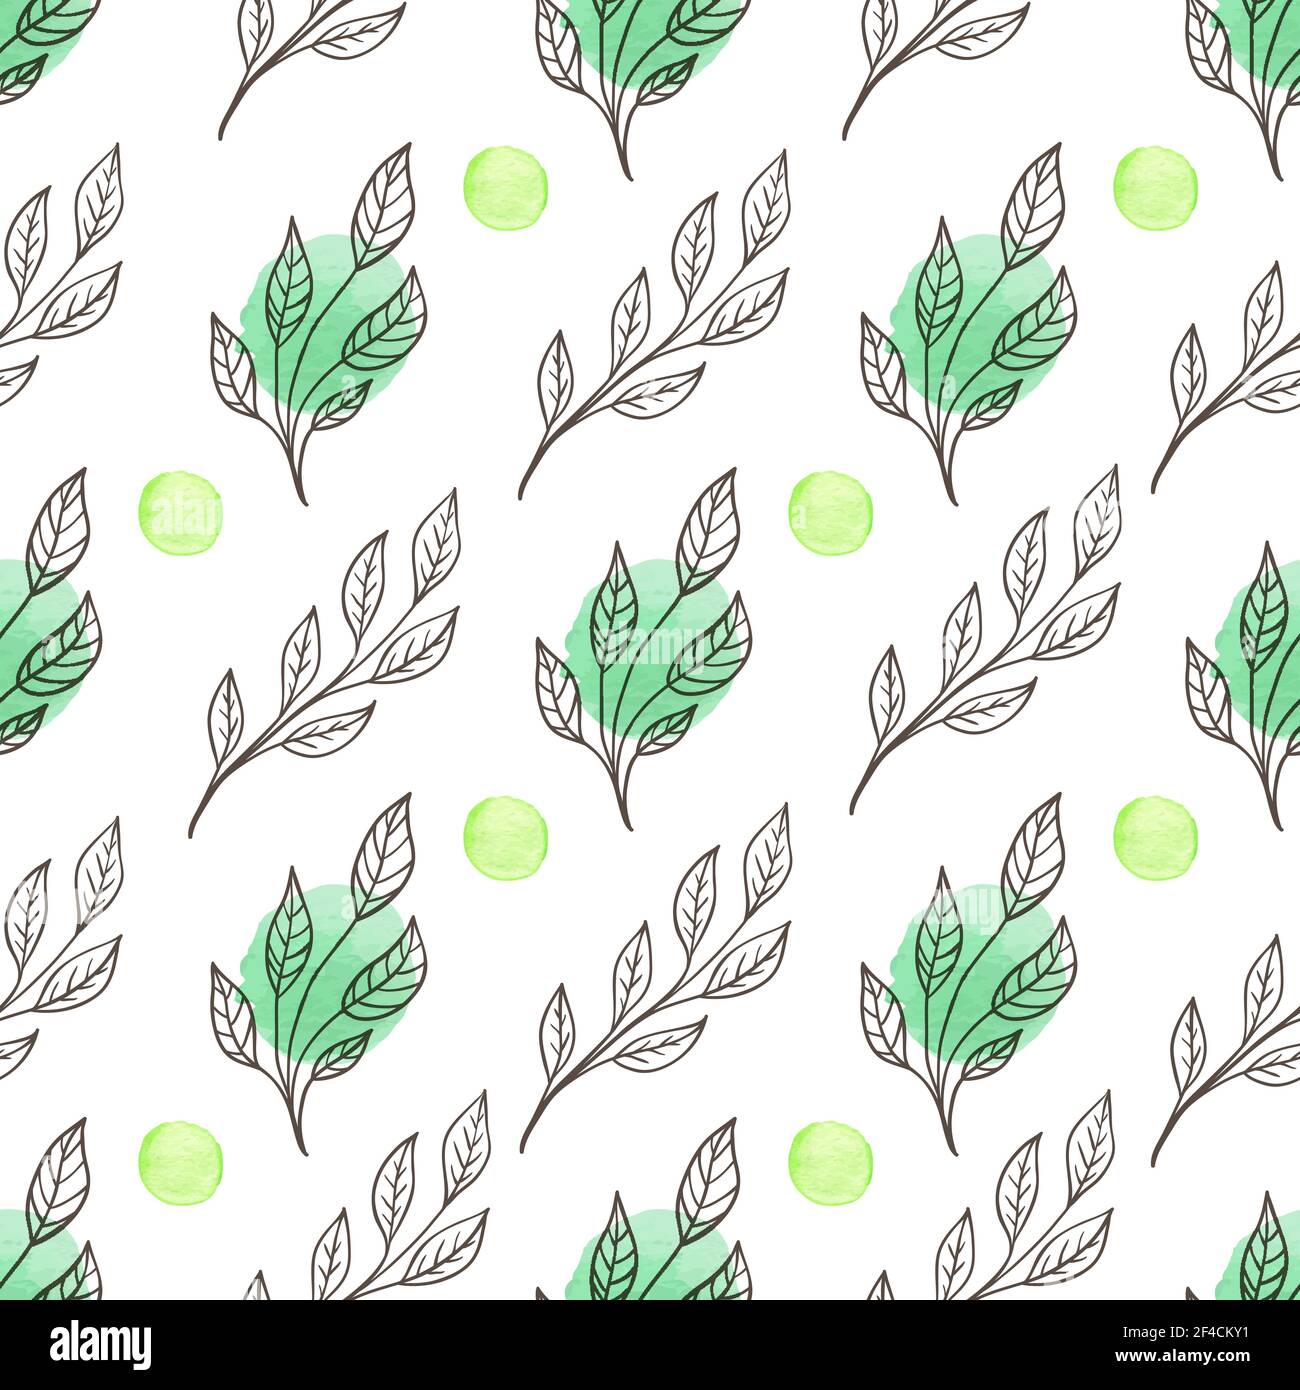 Hand drawn doodle green spring floral seamless pattern with leaves and watercolor blobs. Decorative vector background Stock Vector